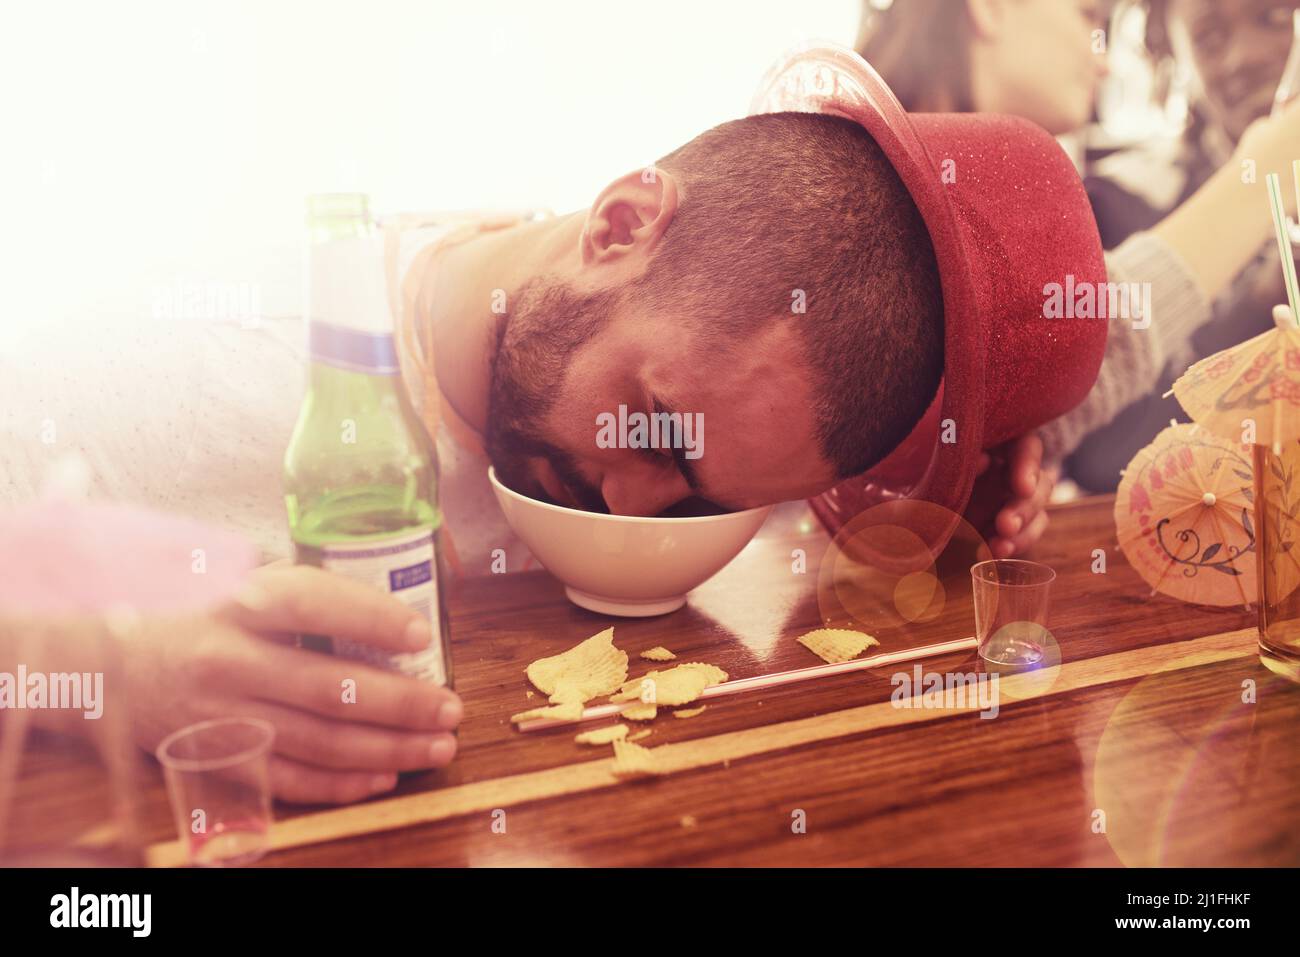 Get this man a bigger bowl. Real party of guys and girls getting drunk. Stock Photo